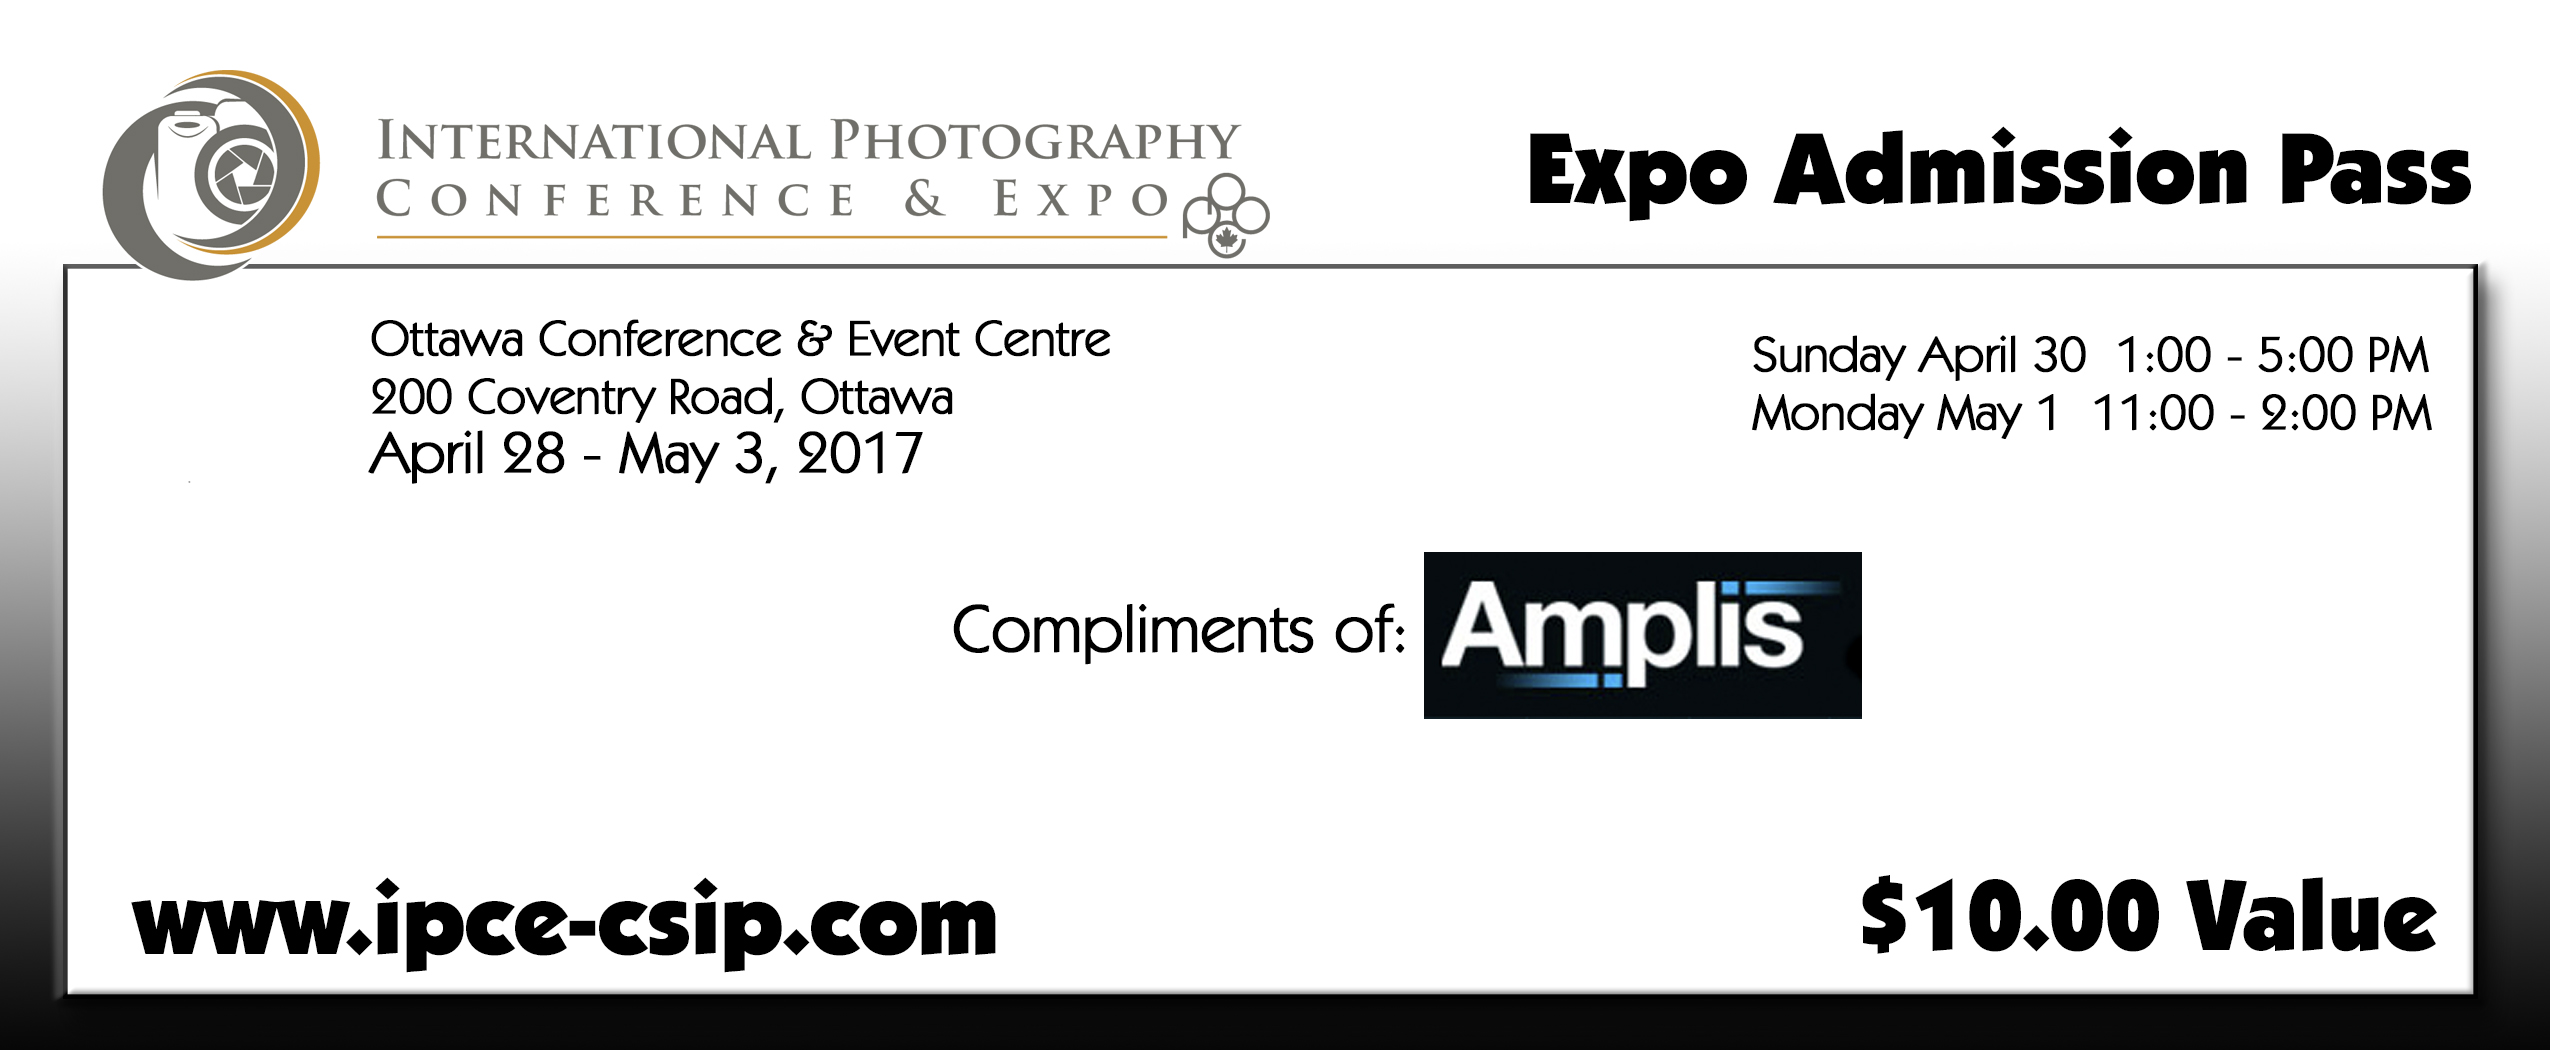 Expo Admission Pass